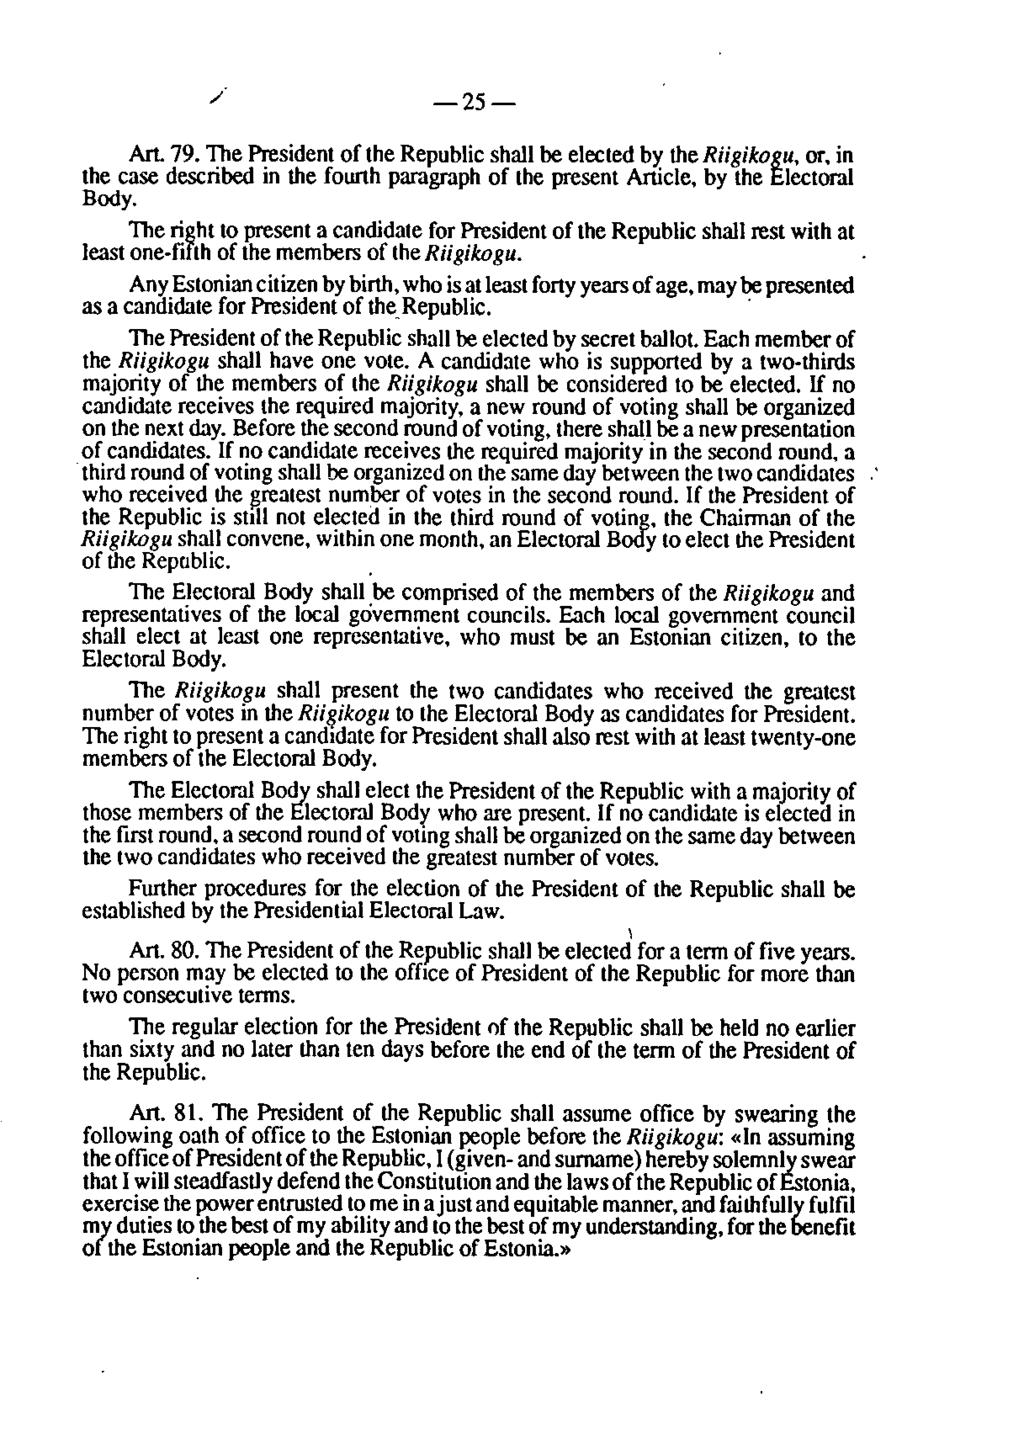 / -25- Art. 79. The President of the Republic shall be elected by the Riigikogu, or, in the case described in the fourth paragraph of the present Article, by the Electoral Body.